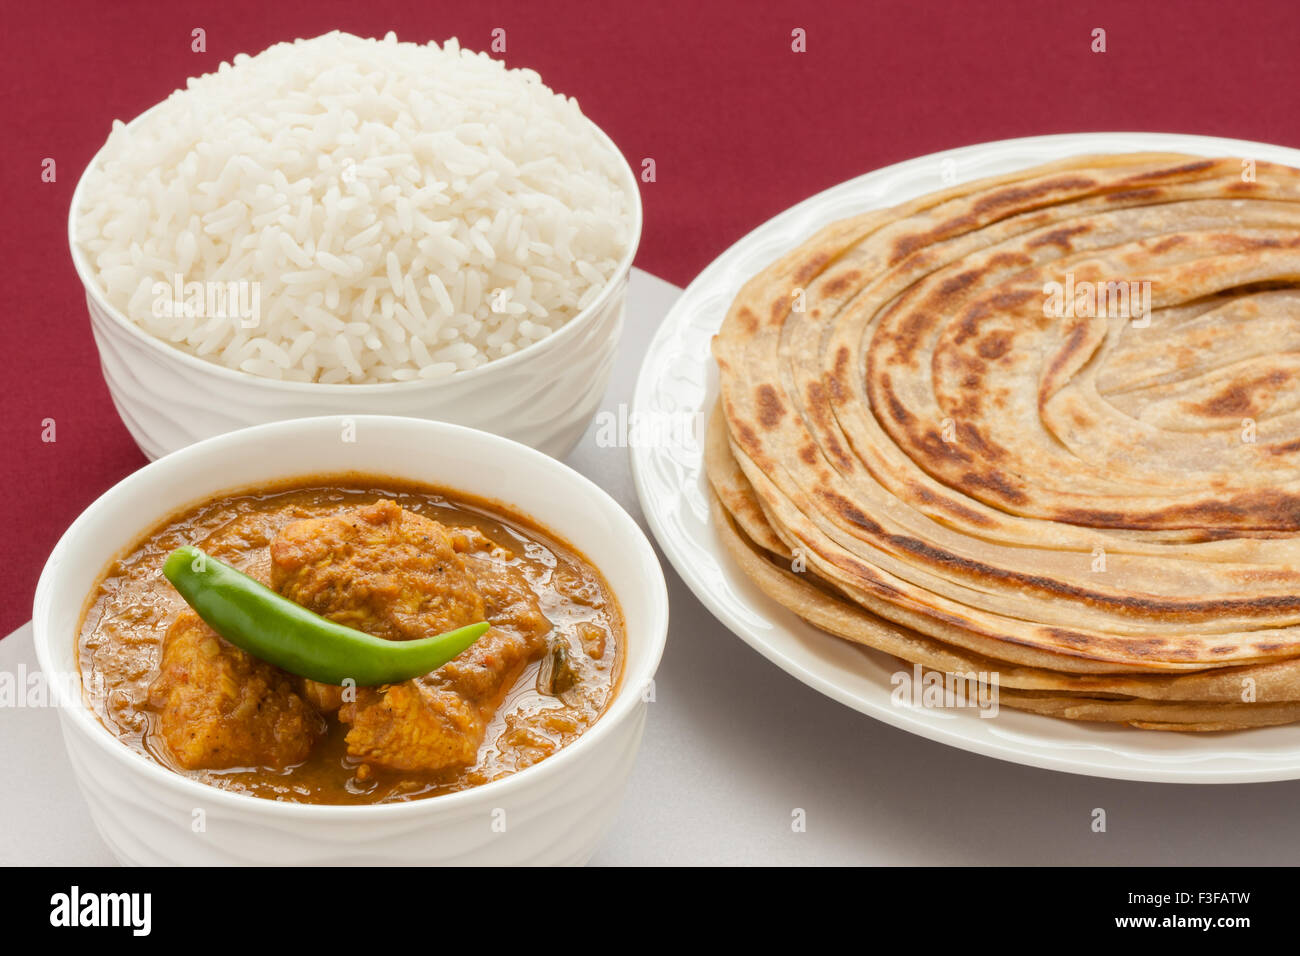 Closeup view of Indian chicken curry meal with rice and wheat parotta (Indian bread). Green chilli used as garnish. Stock Photo